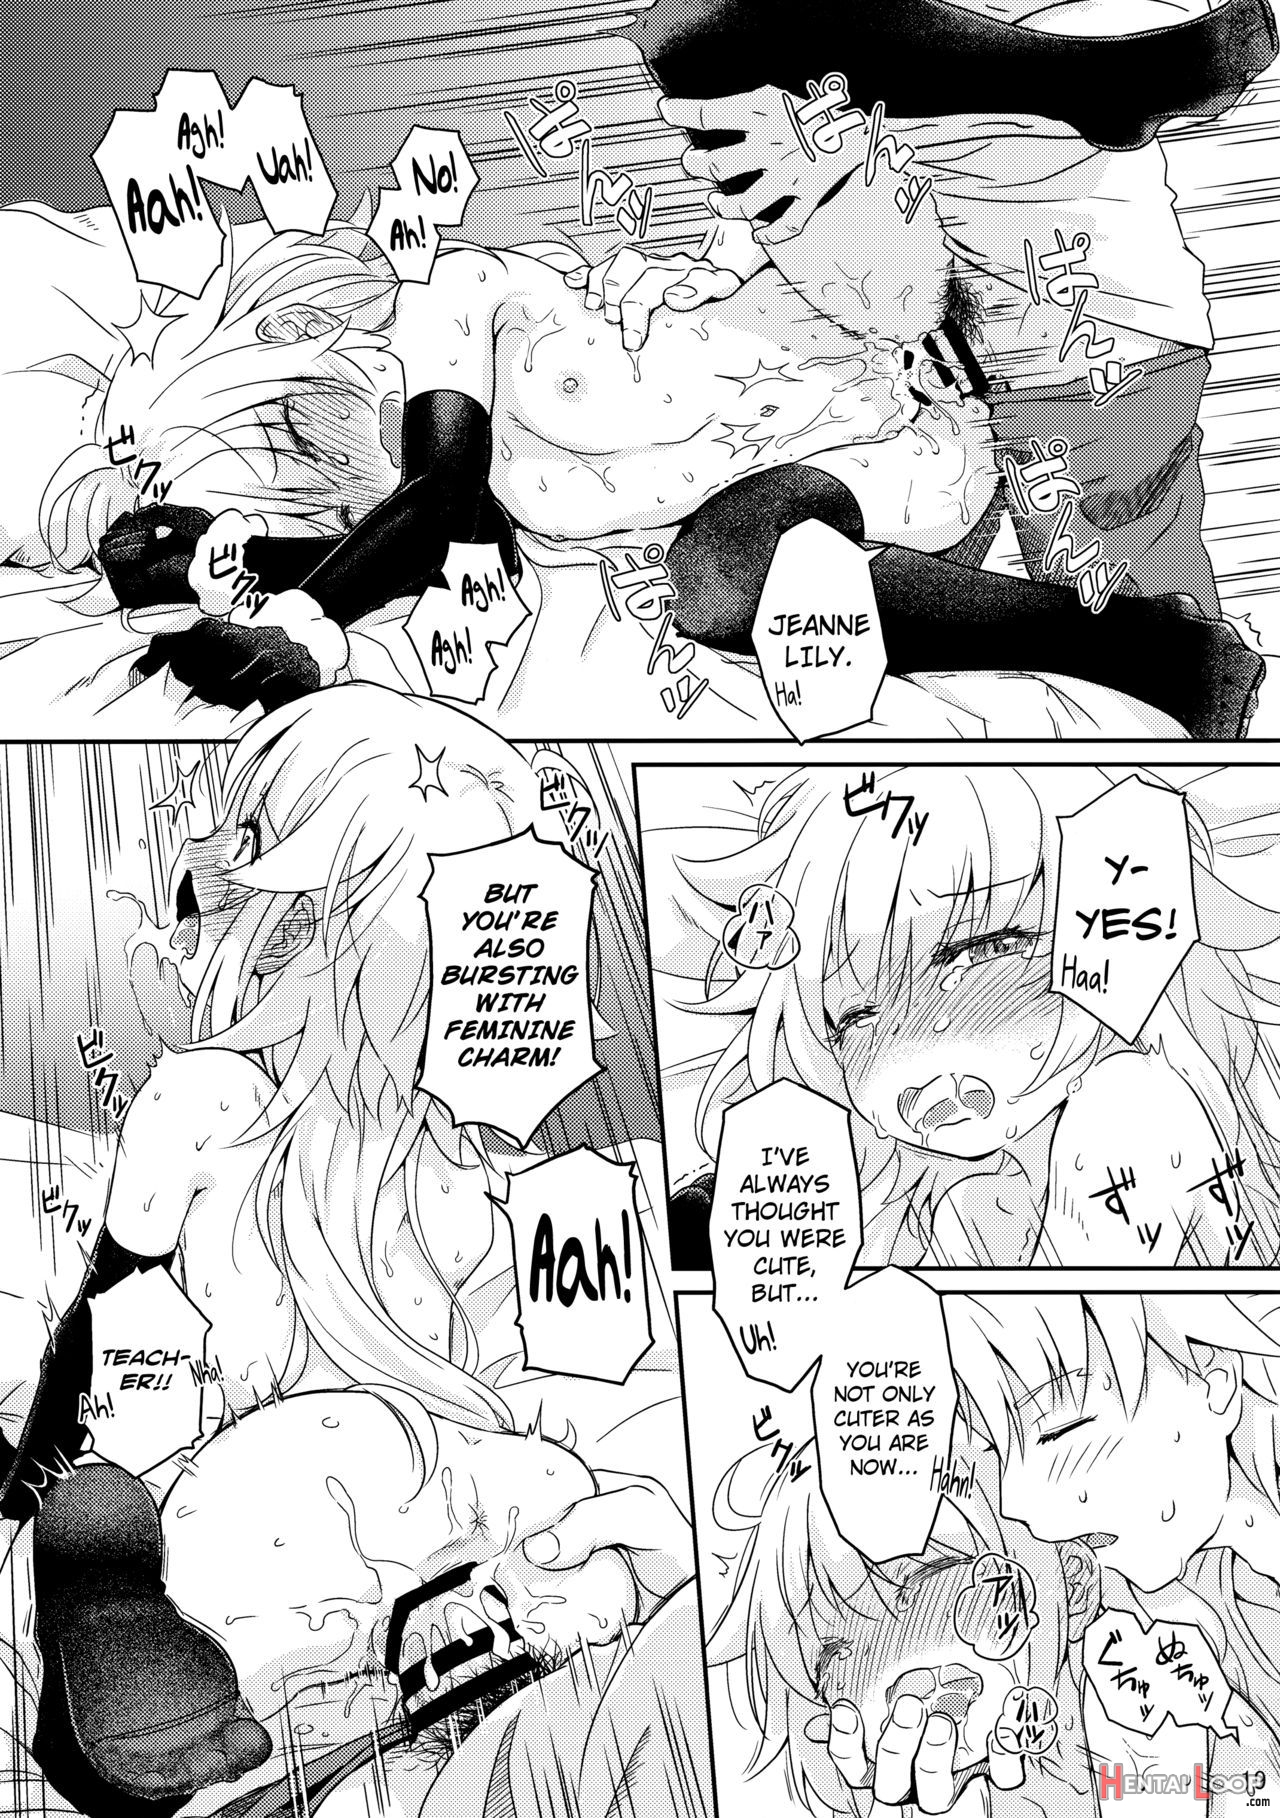 Jeanne Lily Is A Good Girl? page 20